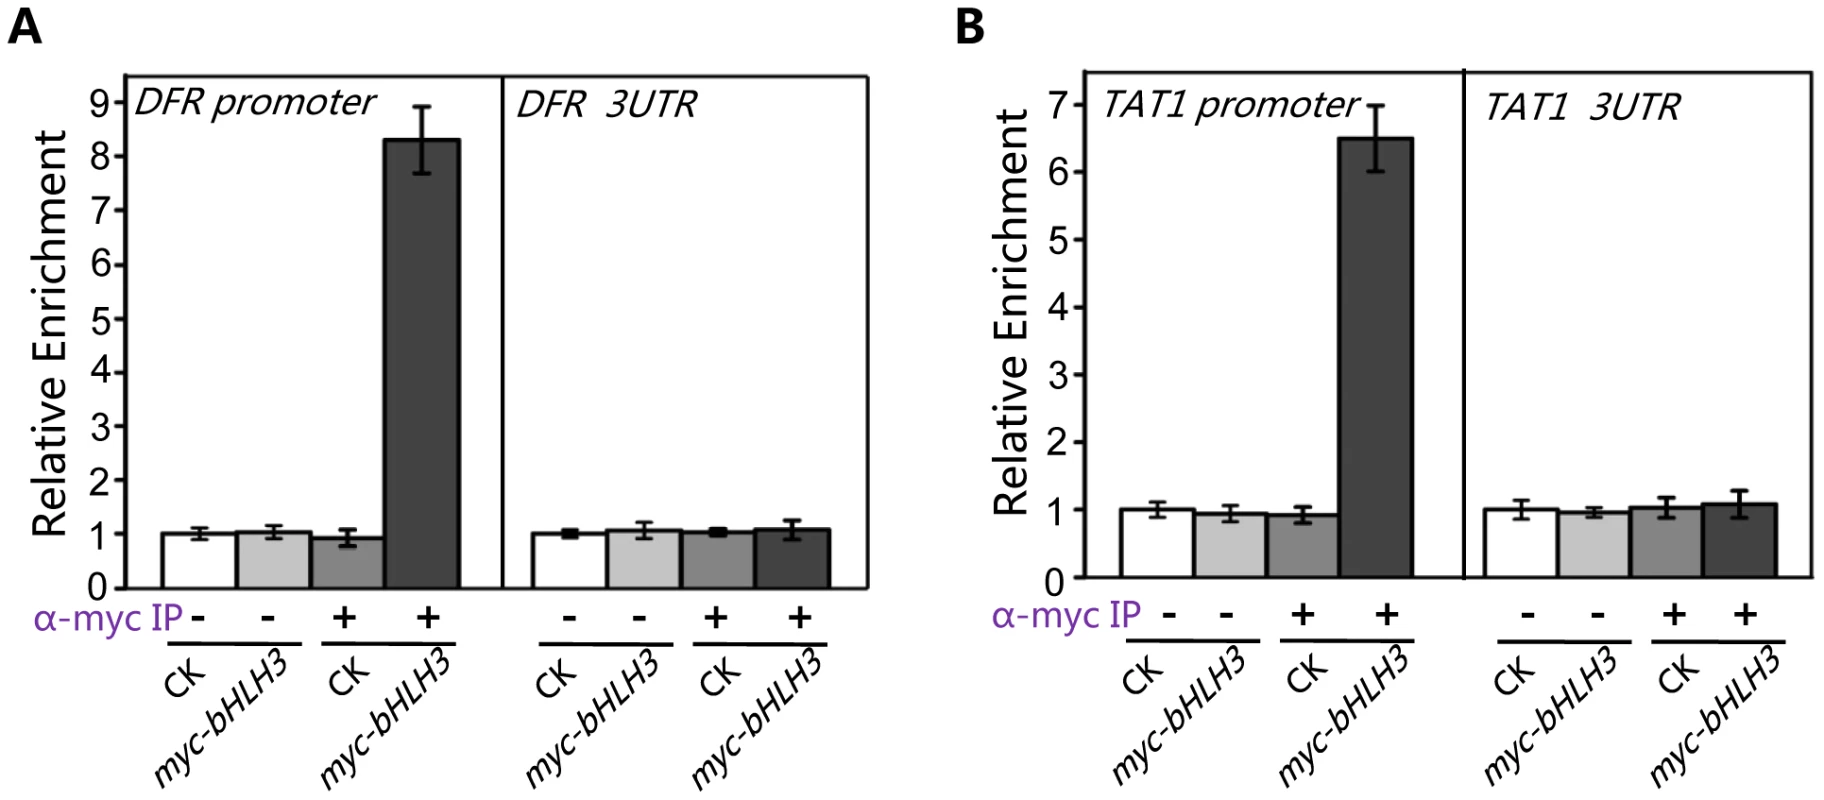 bHLH3 directly binds to promoter sequences of <i>TAT1</i> and <i>DFR</i> in ChIP-PCR assay.